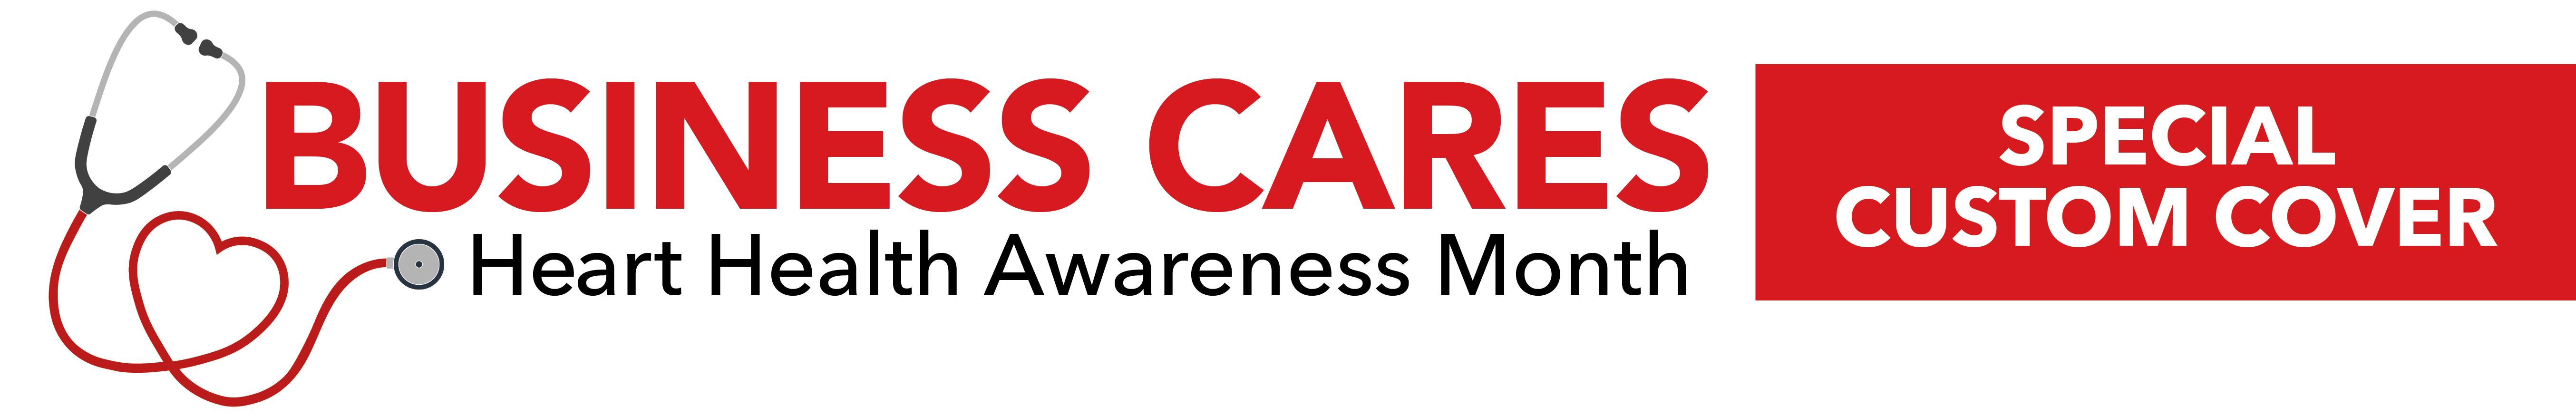 Business Cares: Heart Health Awareness Month